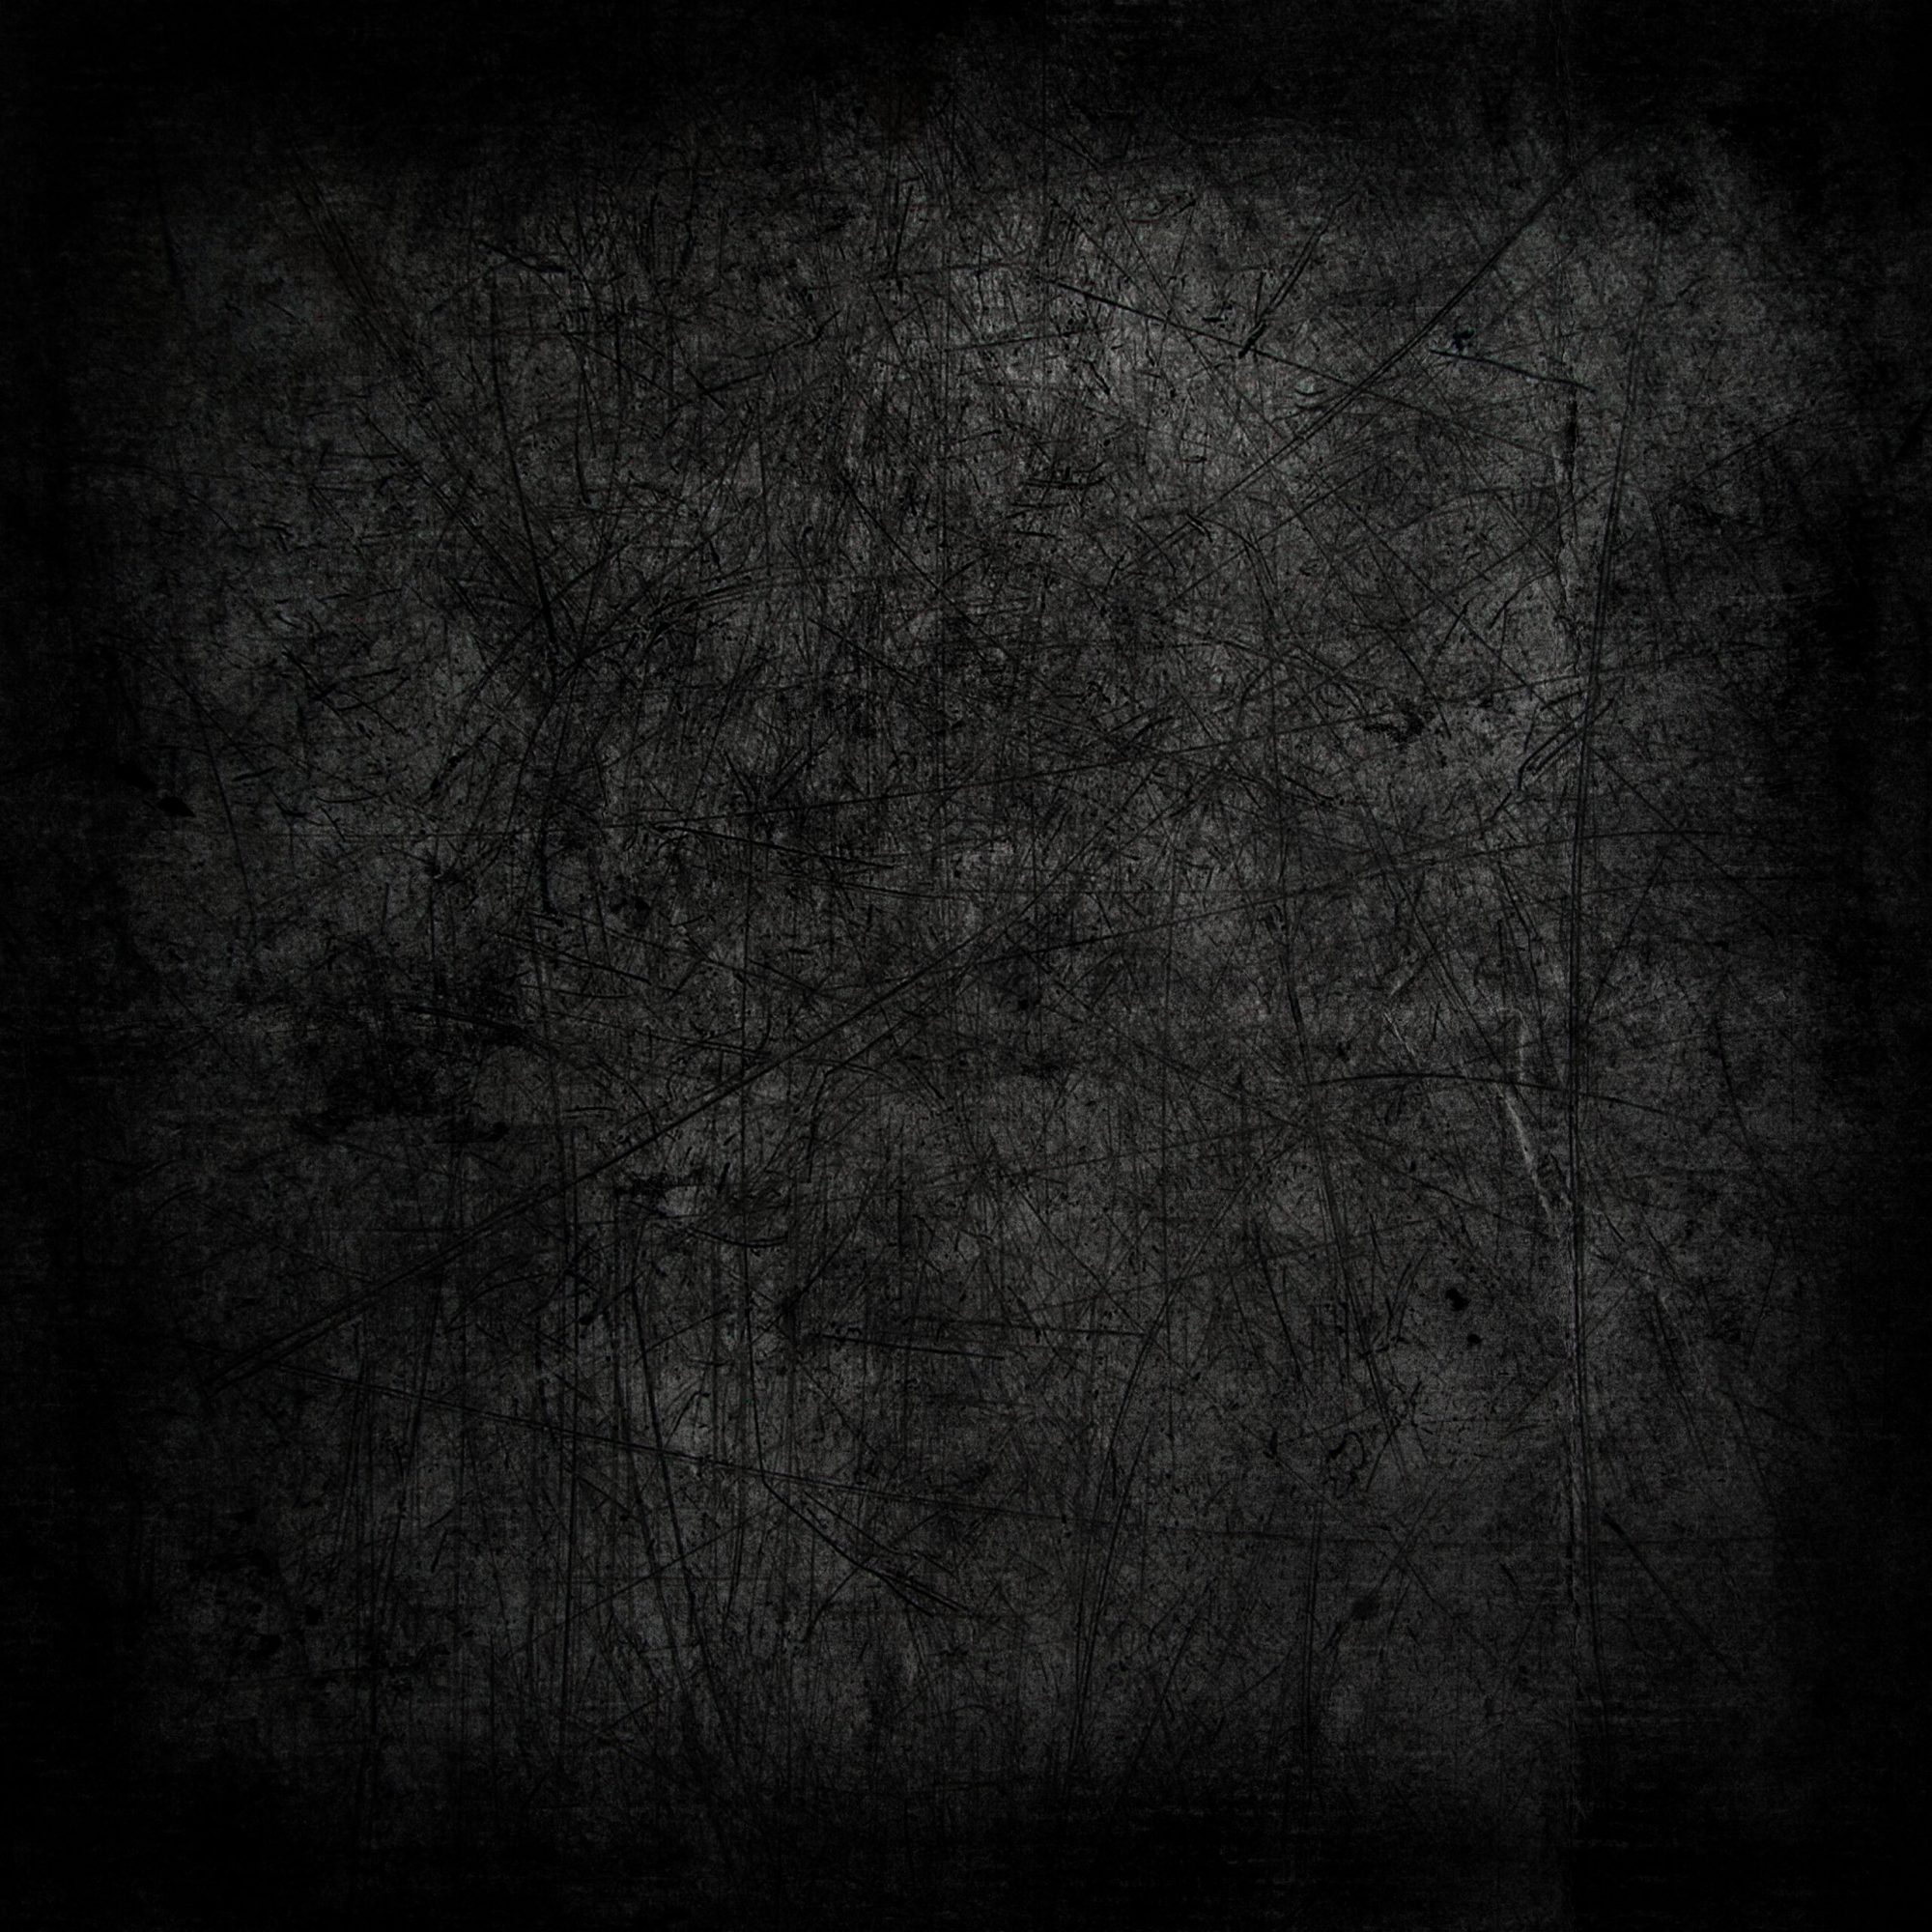 Dark abstract grunge texture background with scratches and stains